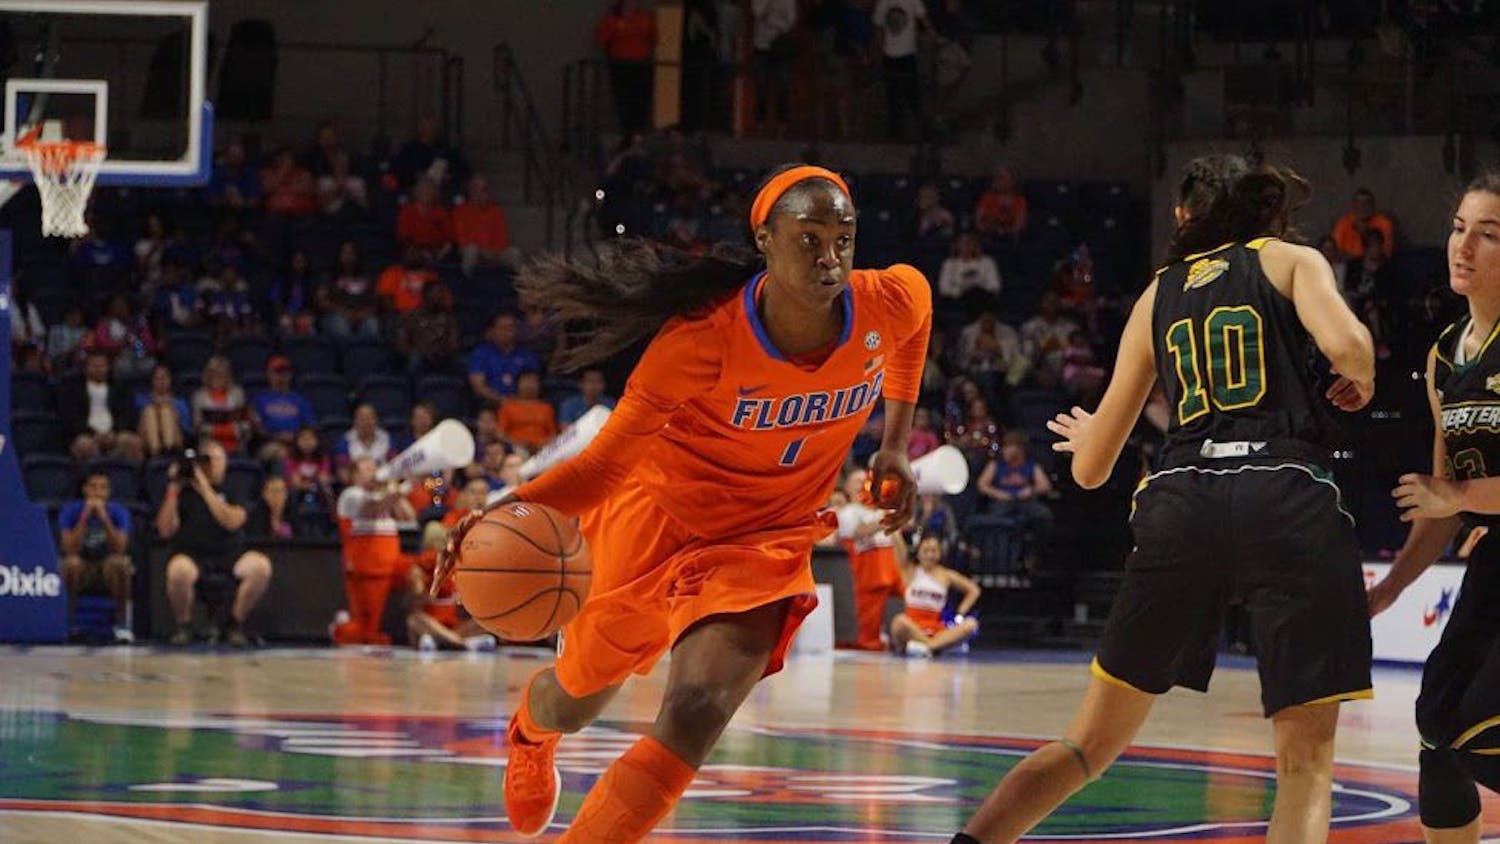 UF forward Ronni Williams dribbles the ball during Florida's 102-51 win over Southeastern Louisiana on Dec. 28, 2016, in the O'Connell Center.&nbsp;